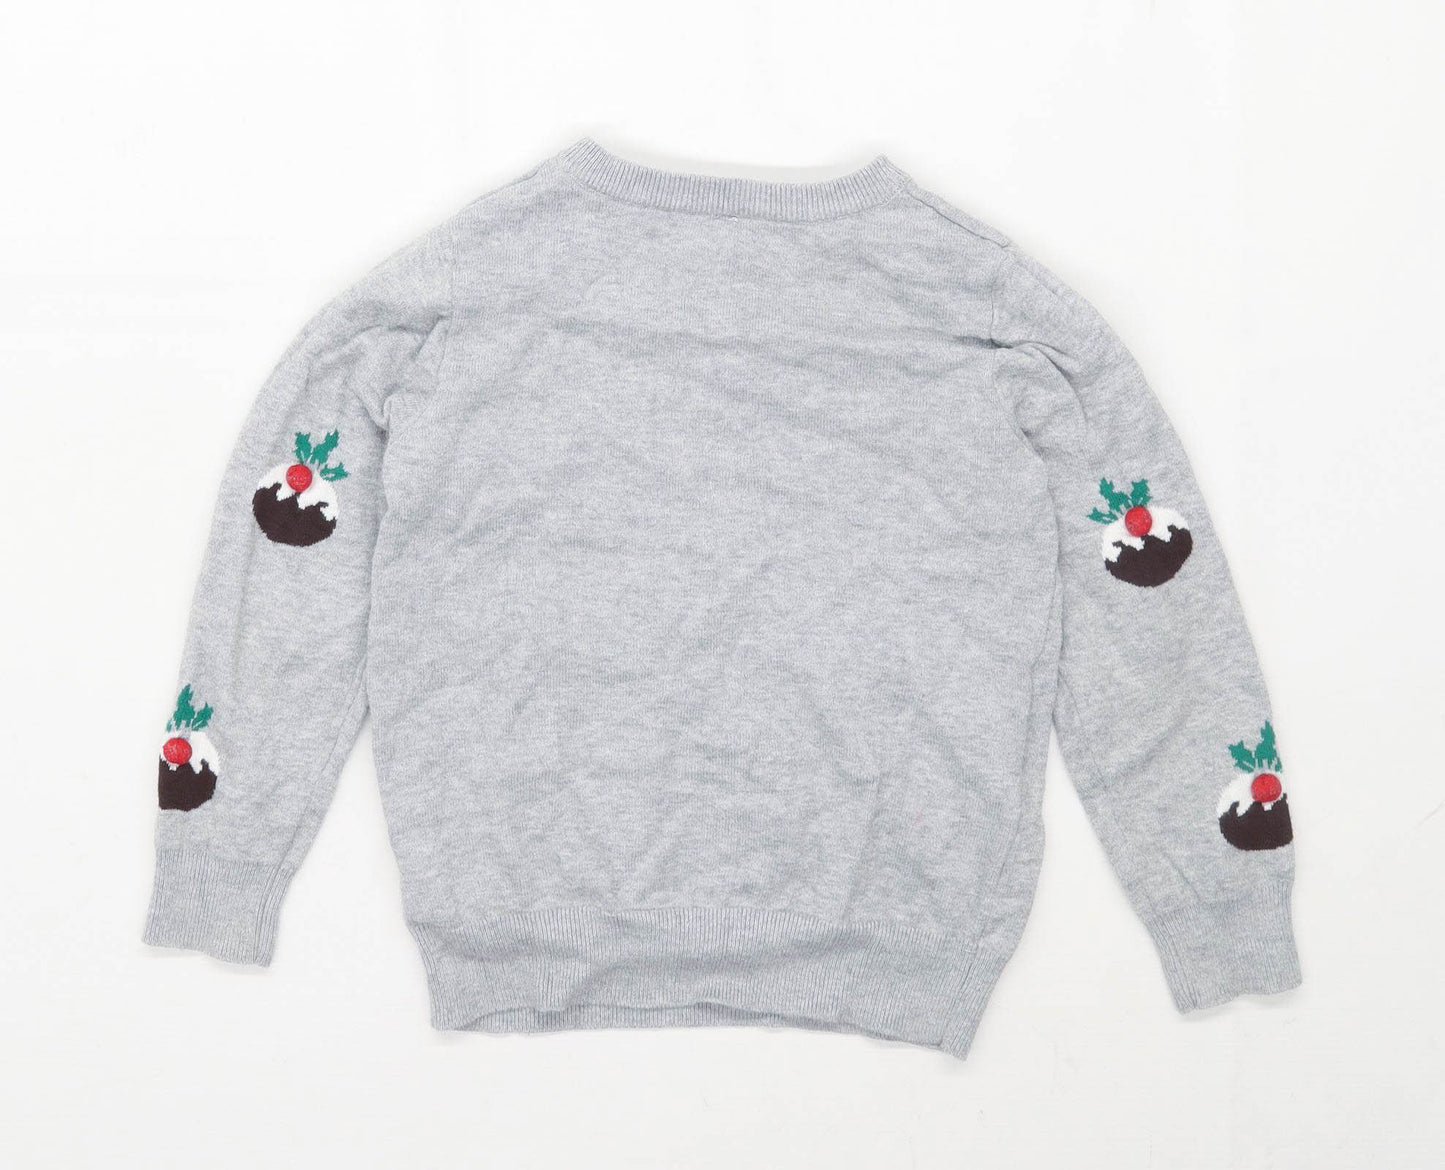 Marks & Spencer Boys Graphic Grey Christmas Jumper Age 6-7 Years